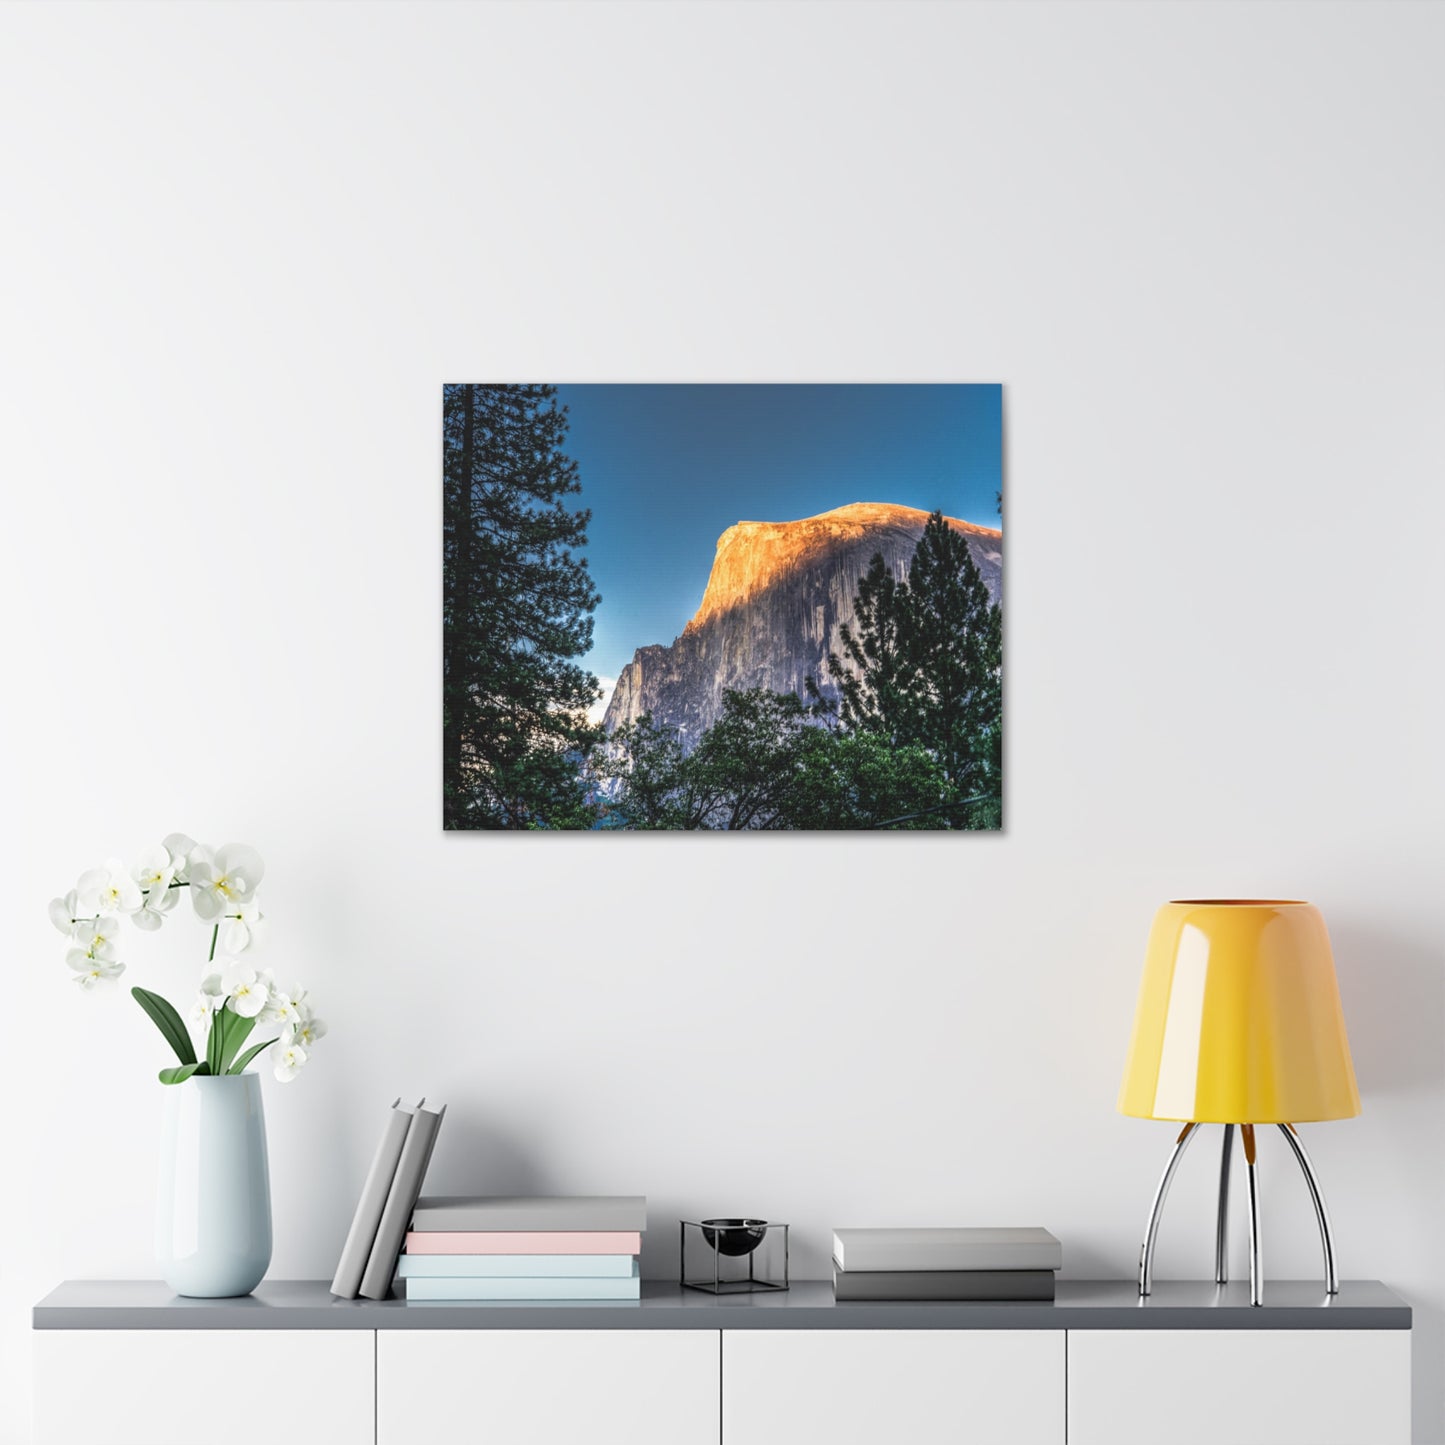 Canvas Print Of A Sunset On Half Dome in Yosemite For Wall Art